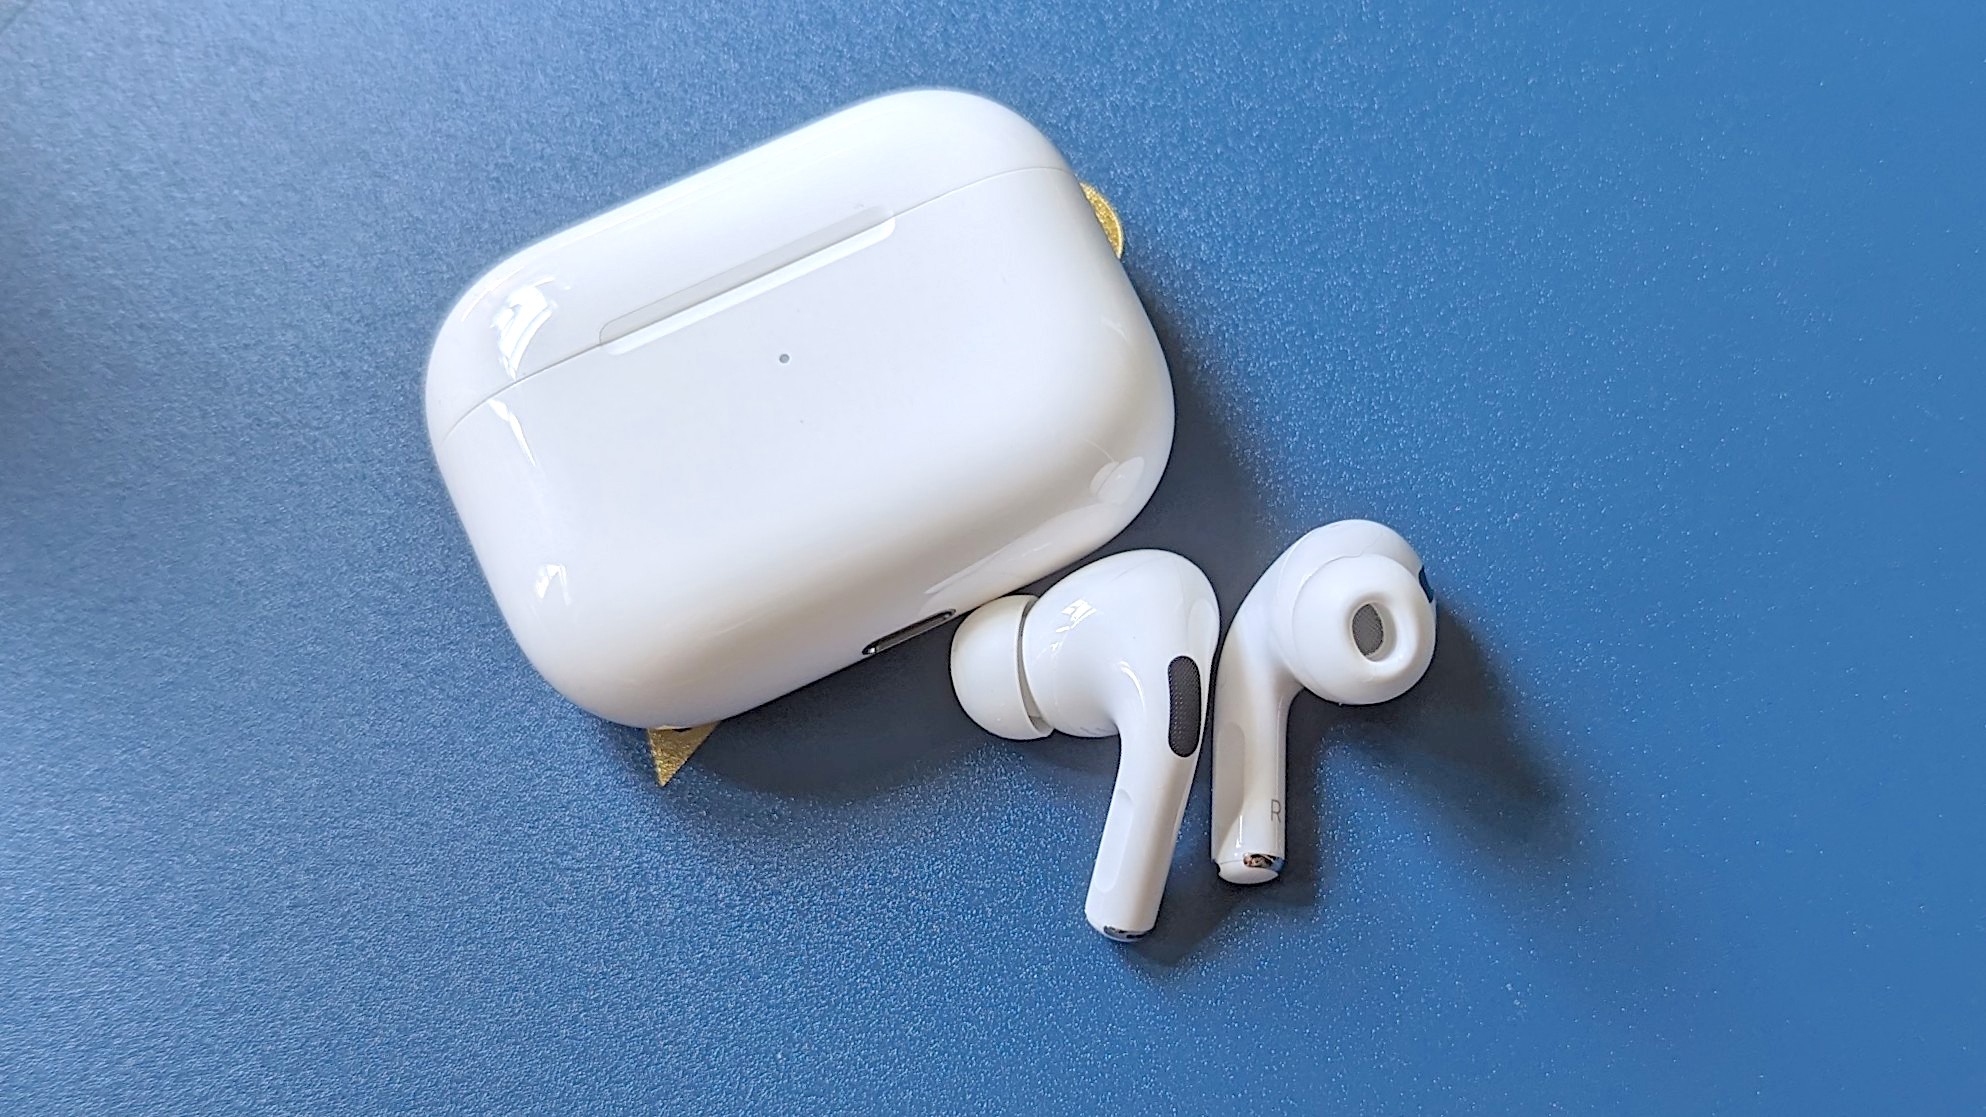 The AirPods Pro (Gen 1) on display